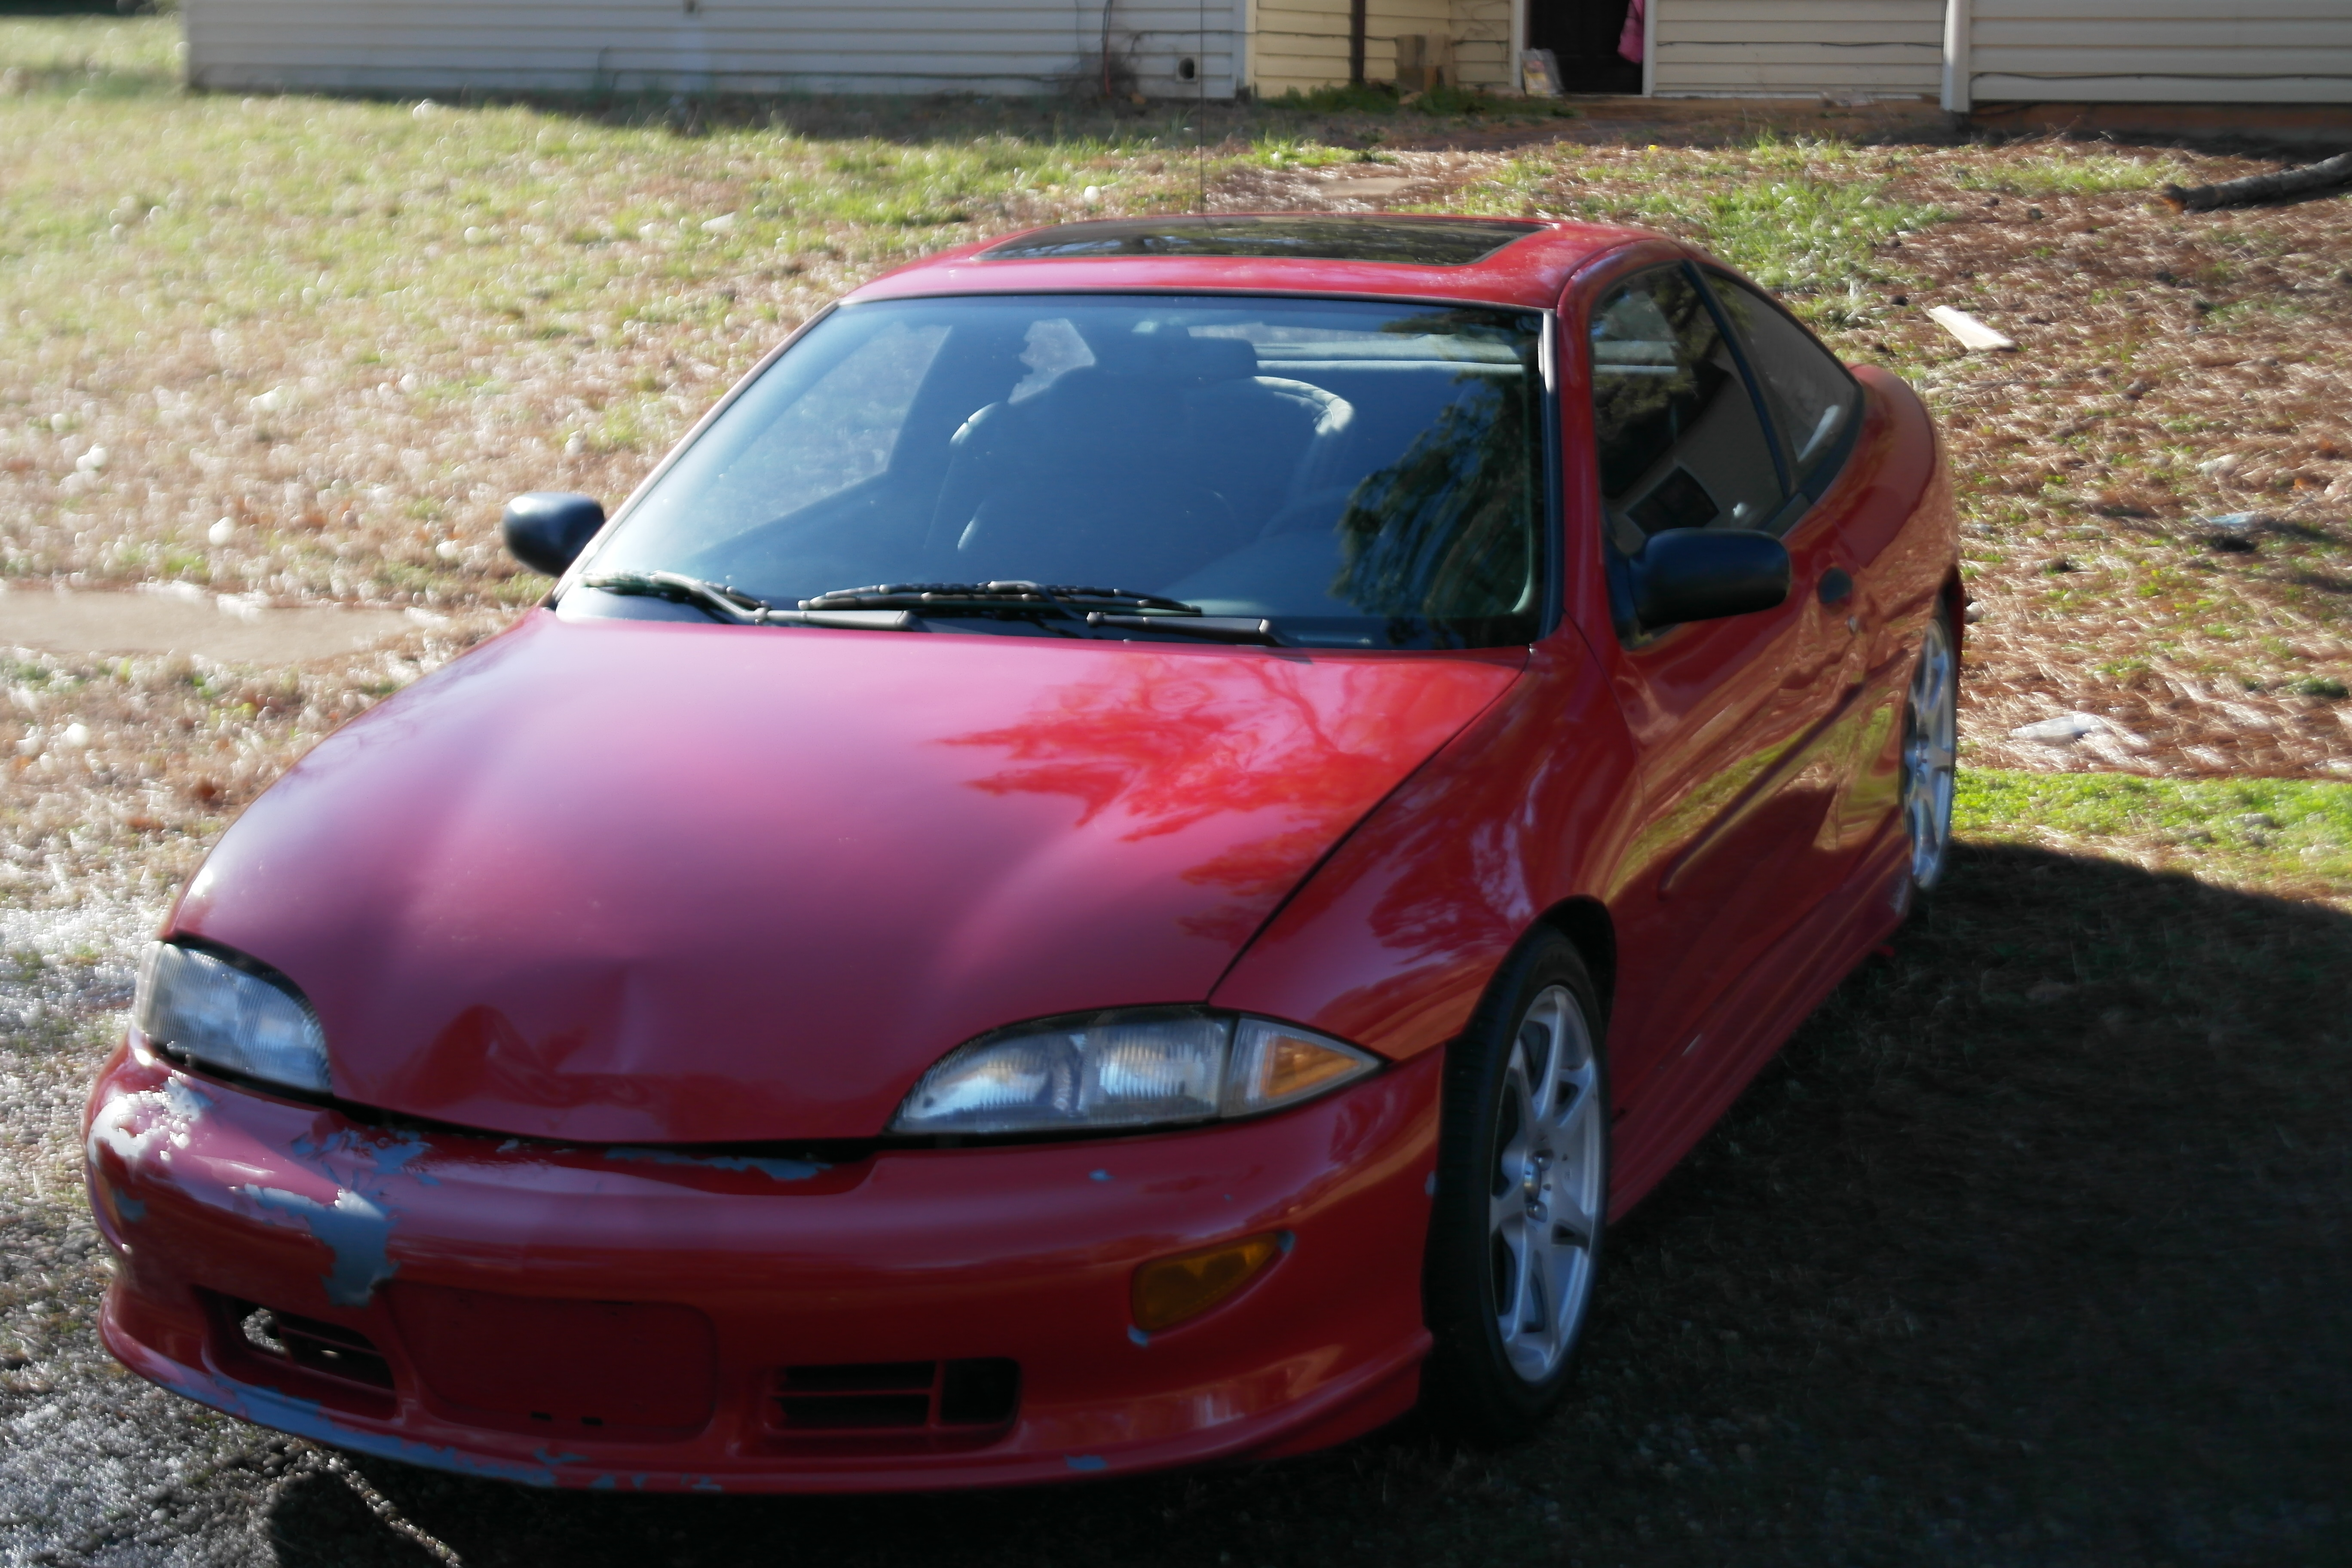 1998 Chevrolet Cavalier Review(Modded) Auto Blogger